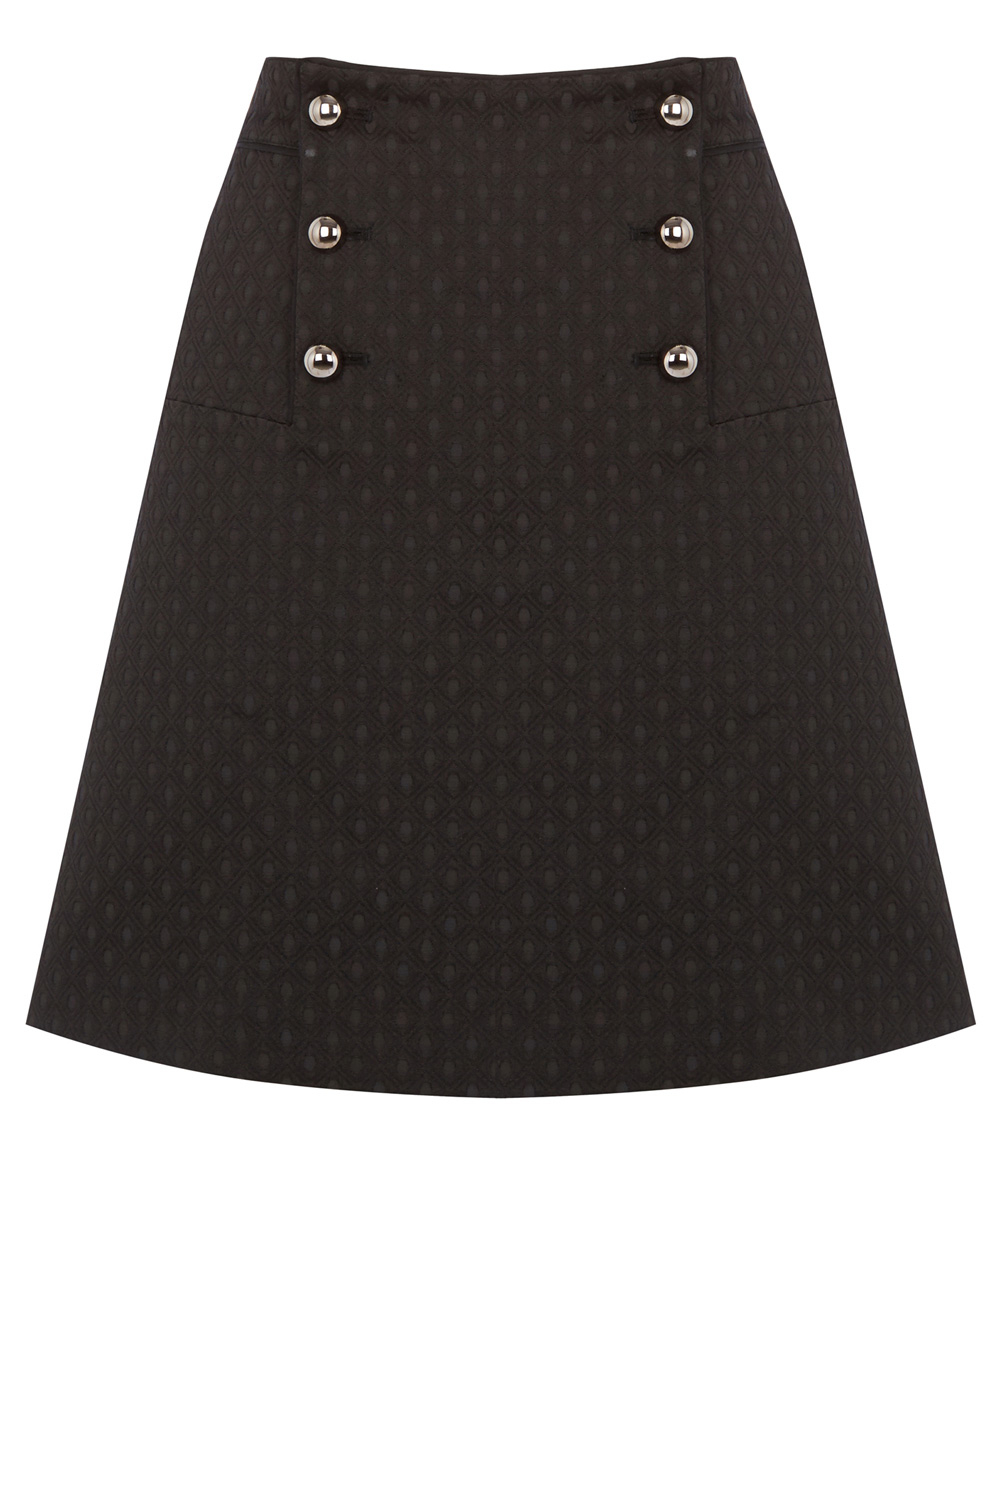 Oasis 60s Button A-line Skirt in Black | Lyst